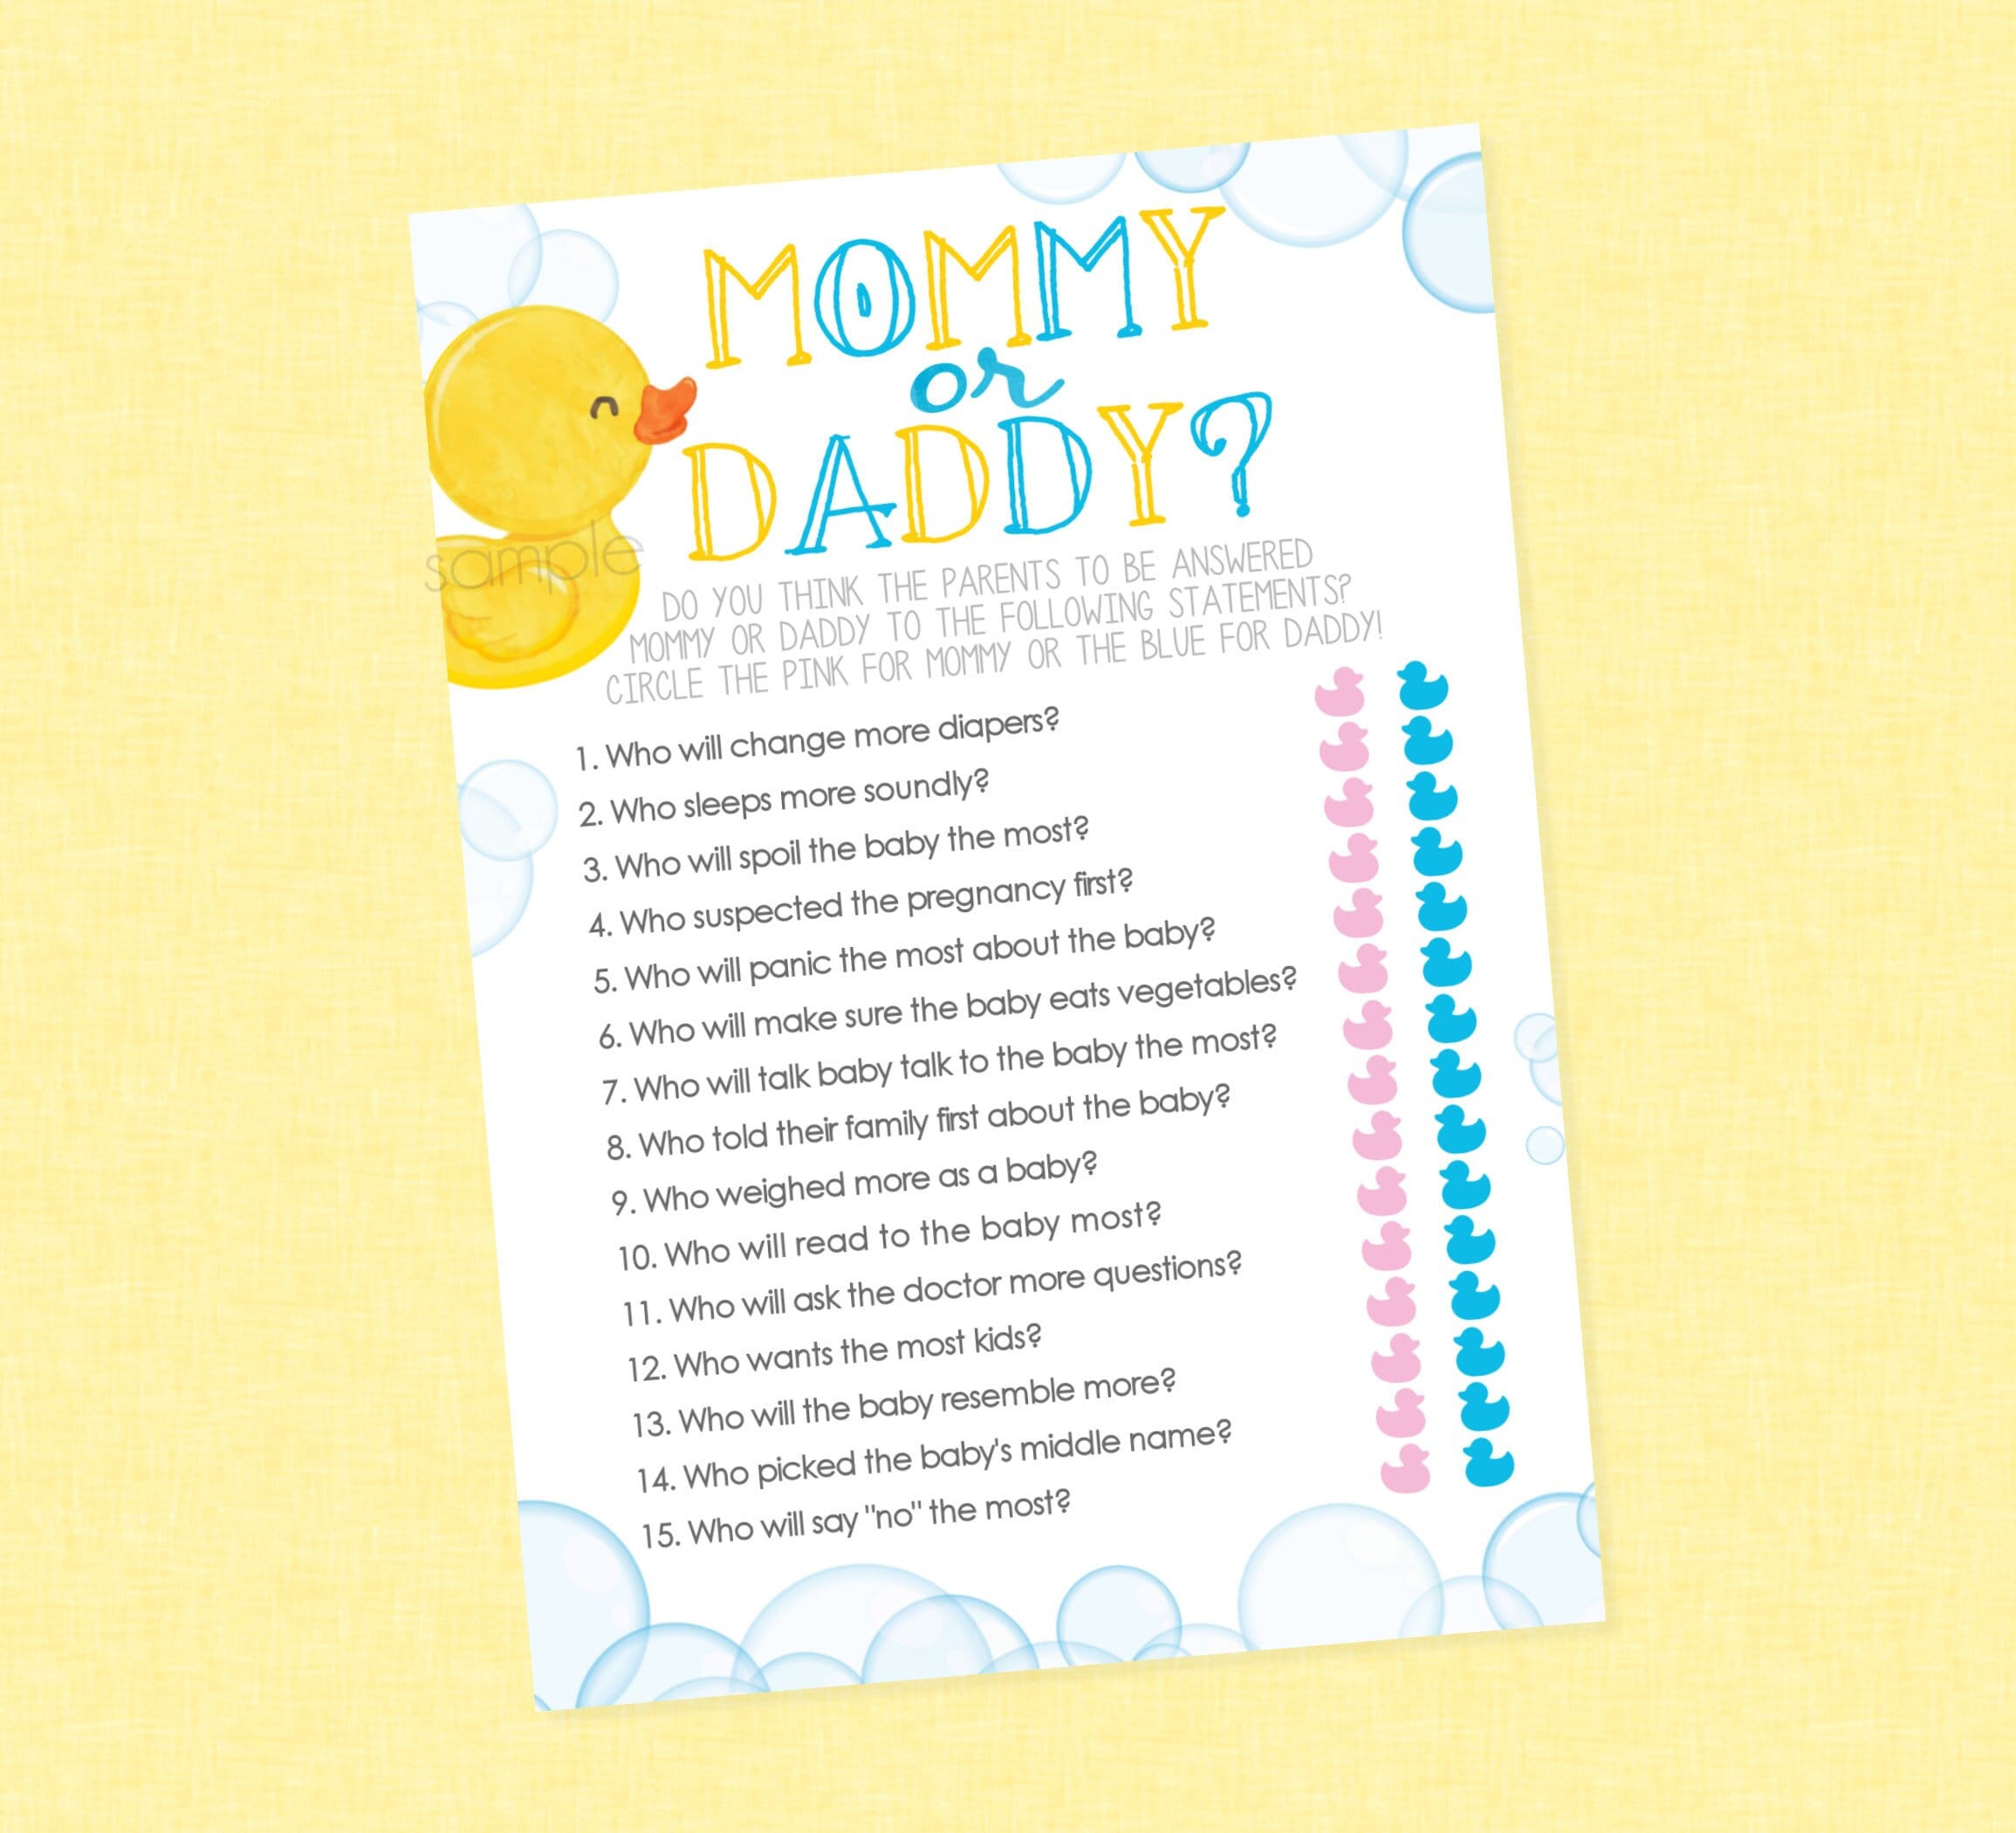 Classic Winnie the Pooh Baby Shower Games/ Name or Guess That Baby